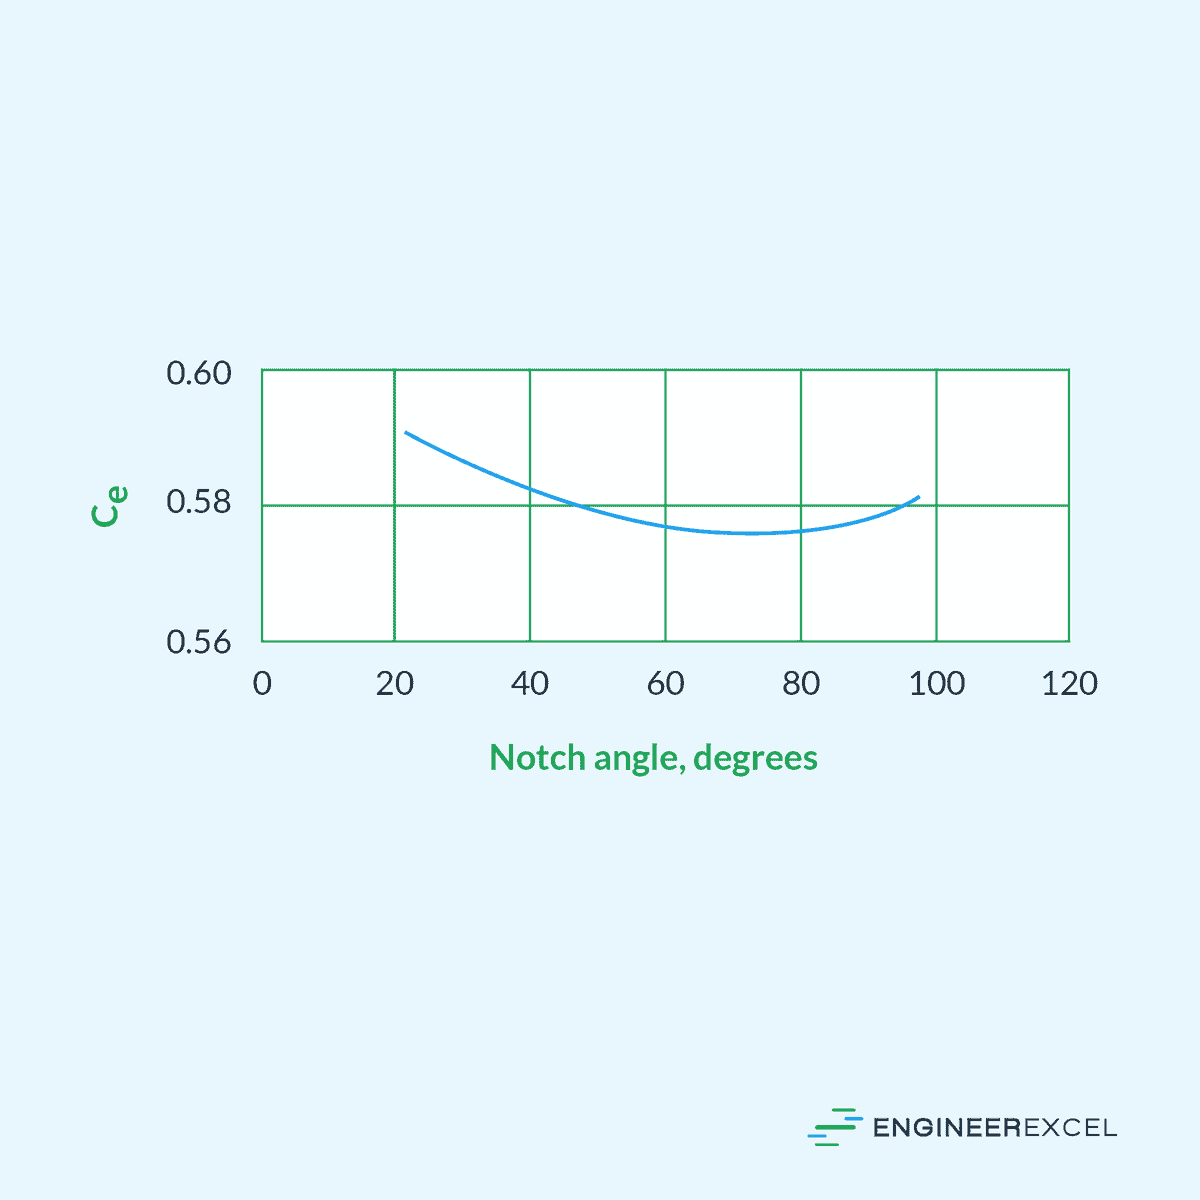 Contraction Coefficient vs Notch Angle